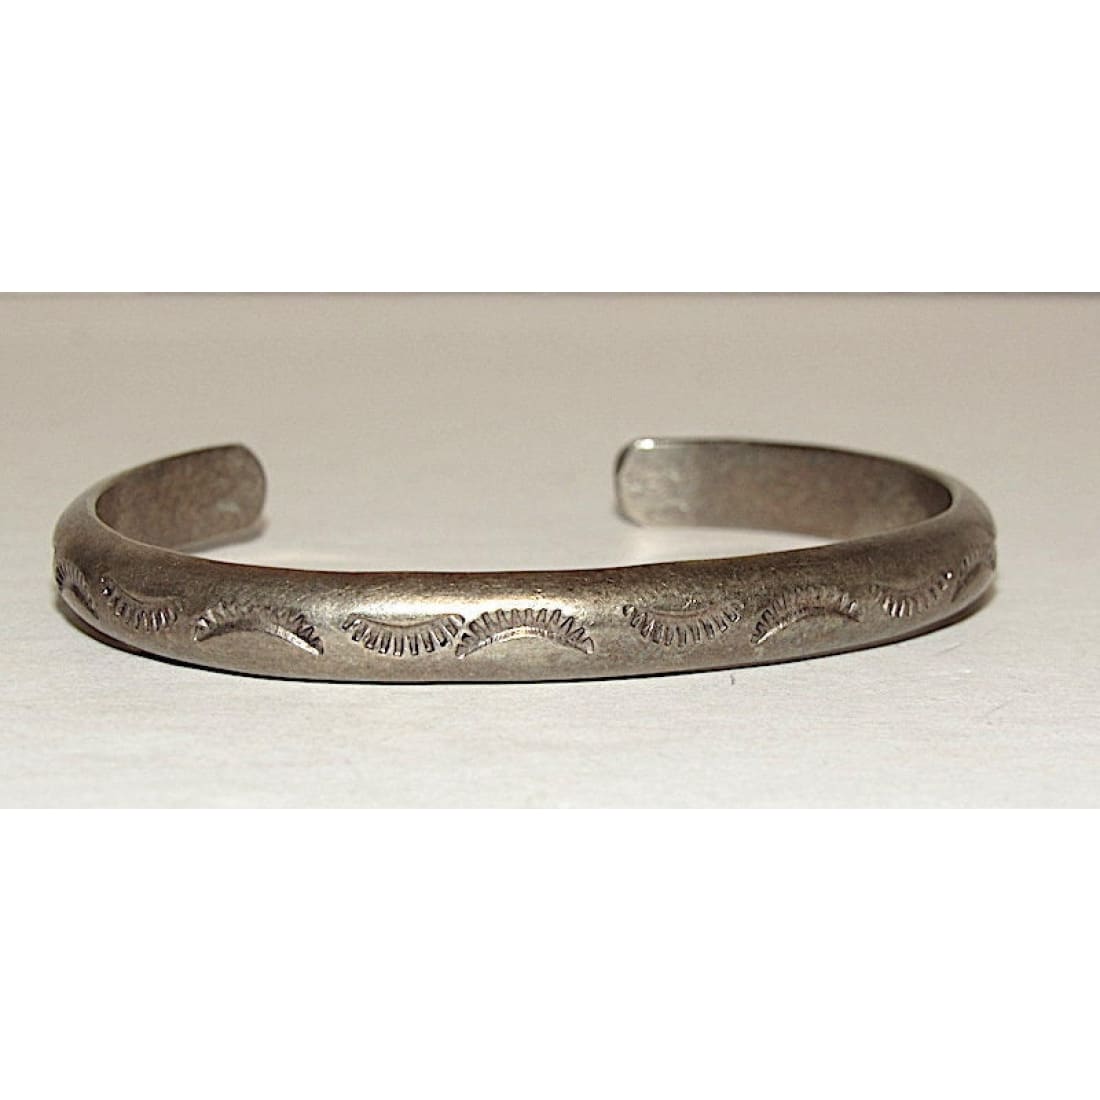 Vintage Navajo Stacker Cuff Bracelet Sterling Silver Vintage Sterling Stackable Cuff Bracelet Hand Etched Design Small Wrist Fred Harvey The Southwestern Style Gallery